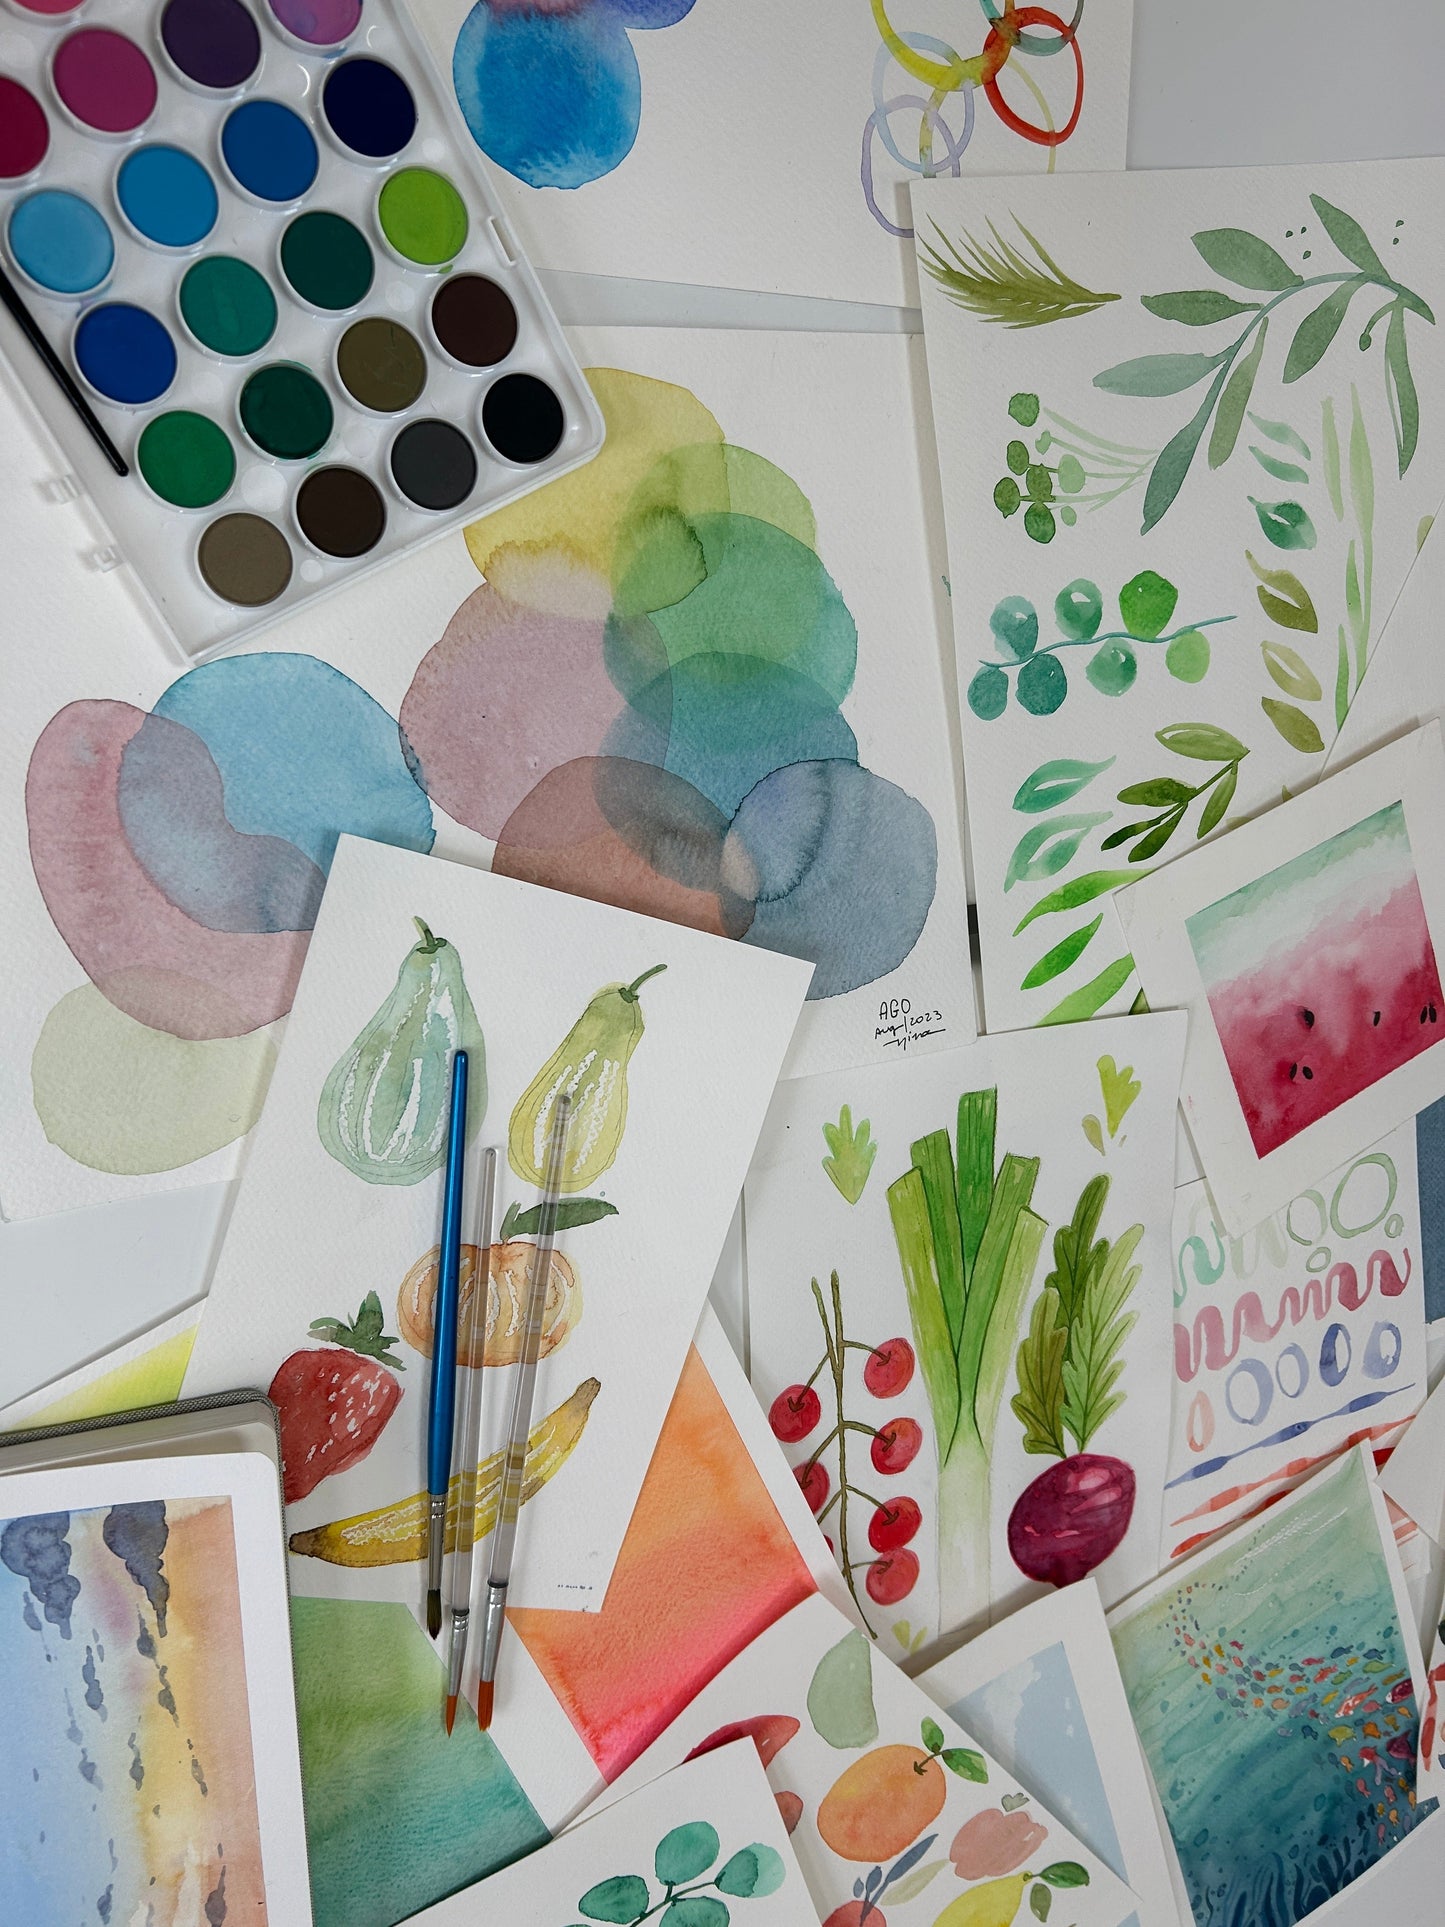 Introduction to Watercolour Workshop - Sunday, May 5th